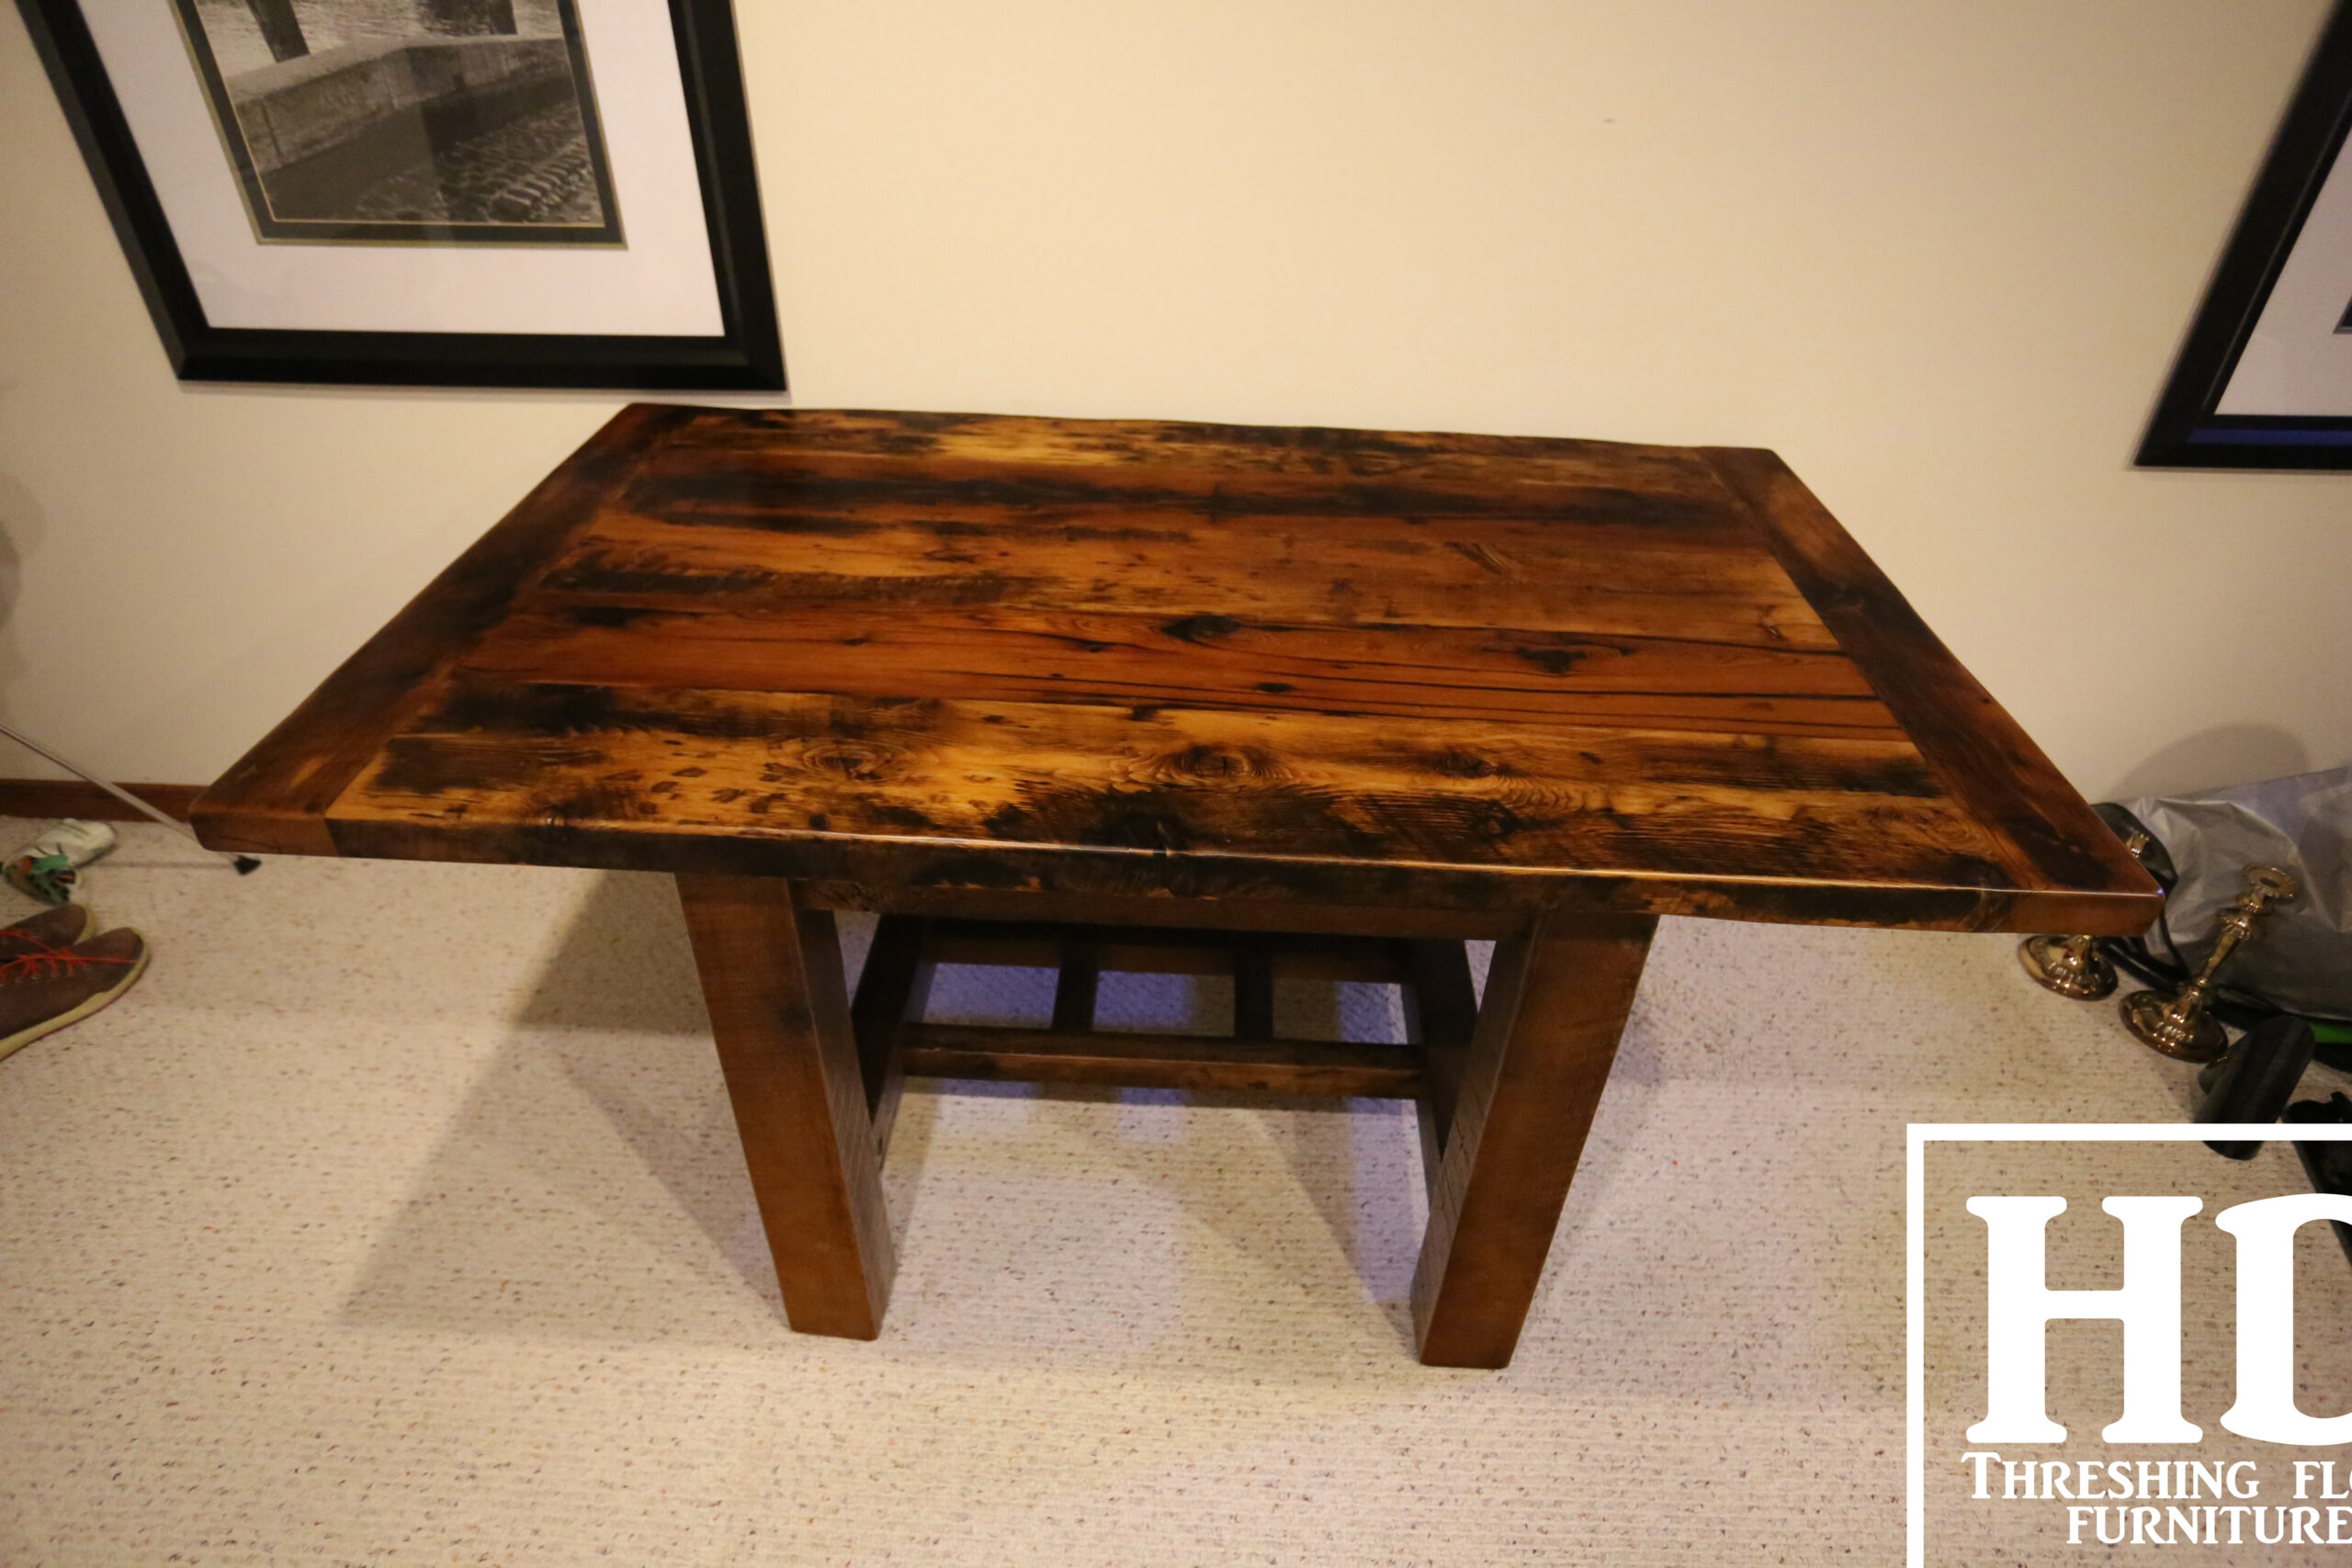 Project details: 5 ft Reclaimed Ontario Barnwood Desk we made for a Thornhill, Ontario home - 36" wide – Frame Base - Old Growth Hemlock Threshing Floor Construction – Bread edge Ends - Original edges & distressing maintained - Premium epoxy + satin polyurethane finish - www.table.ca